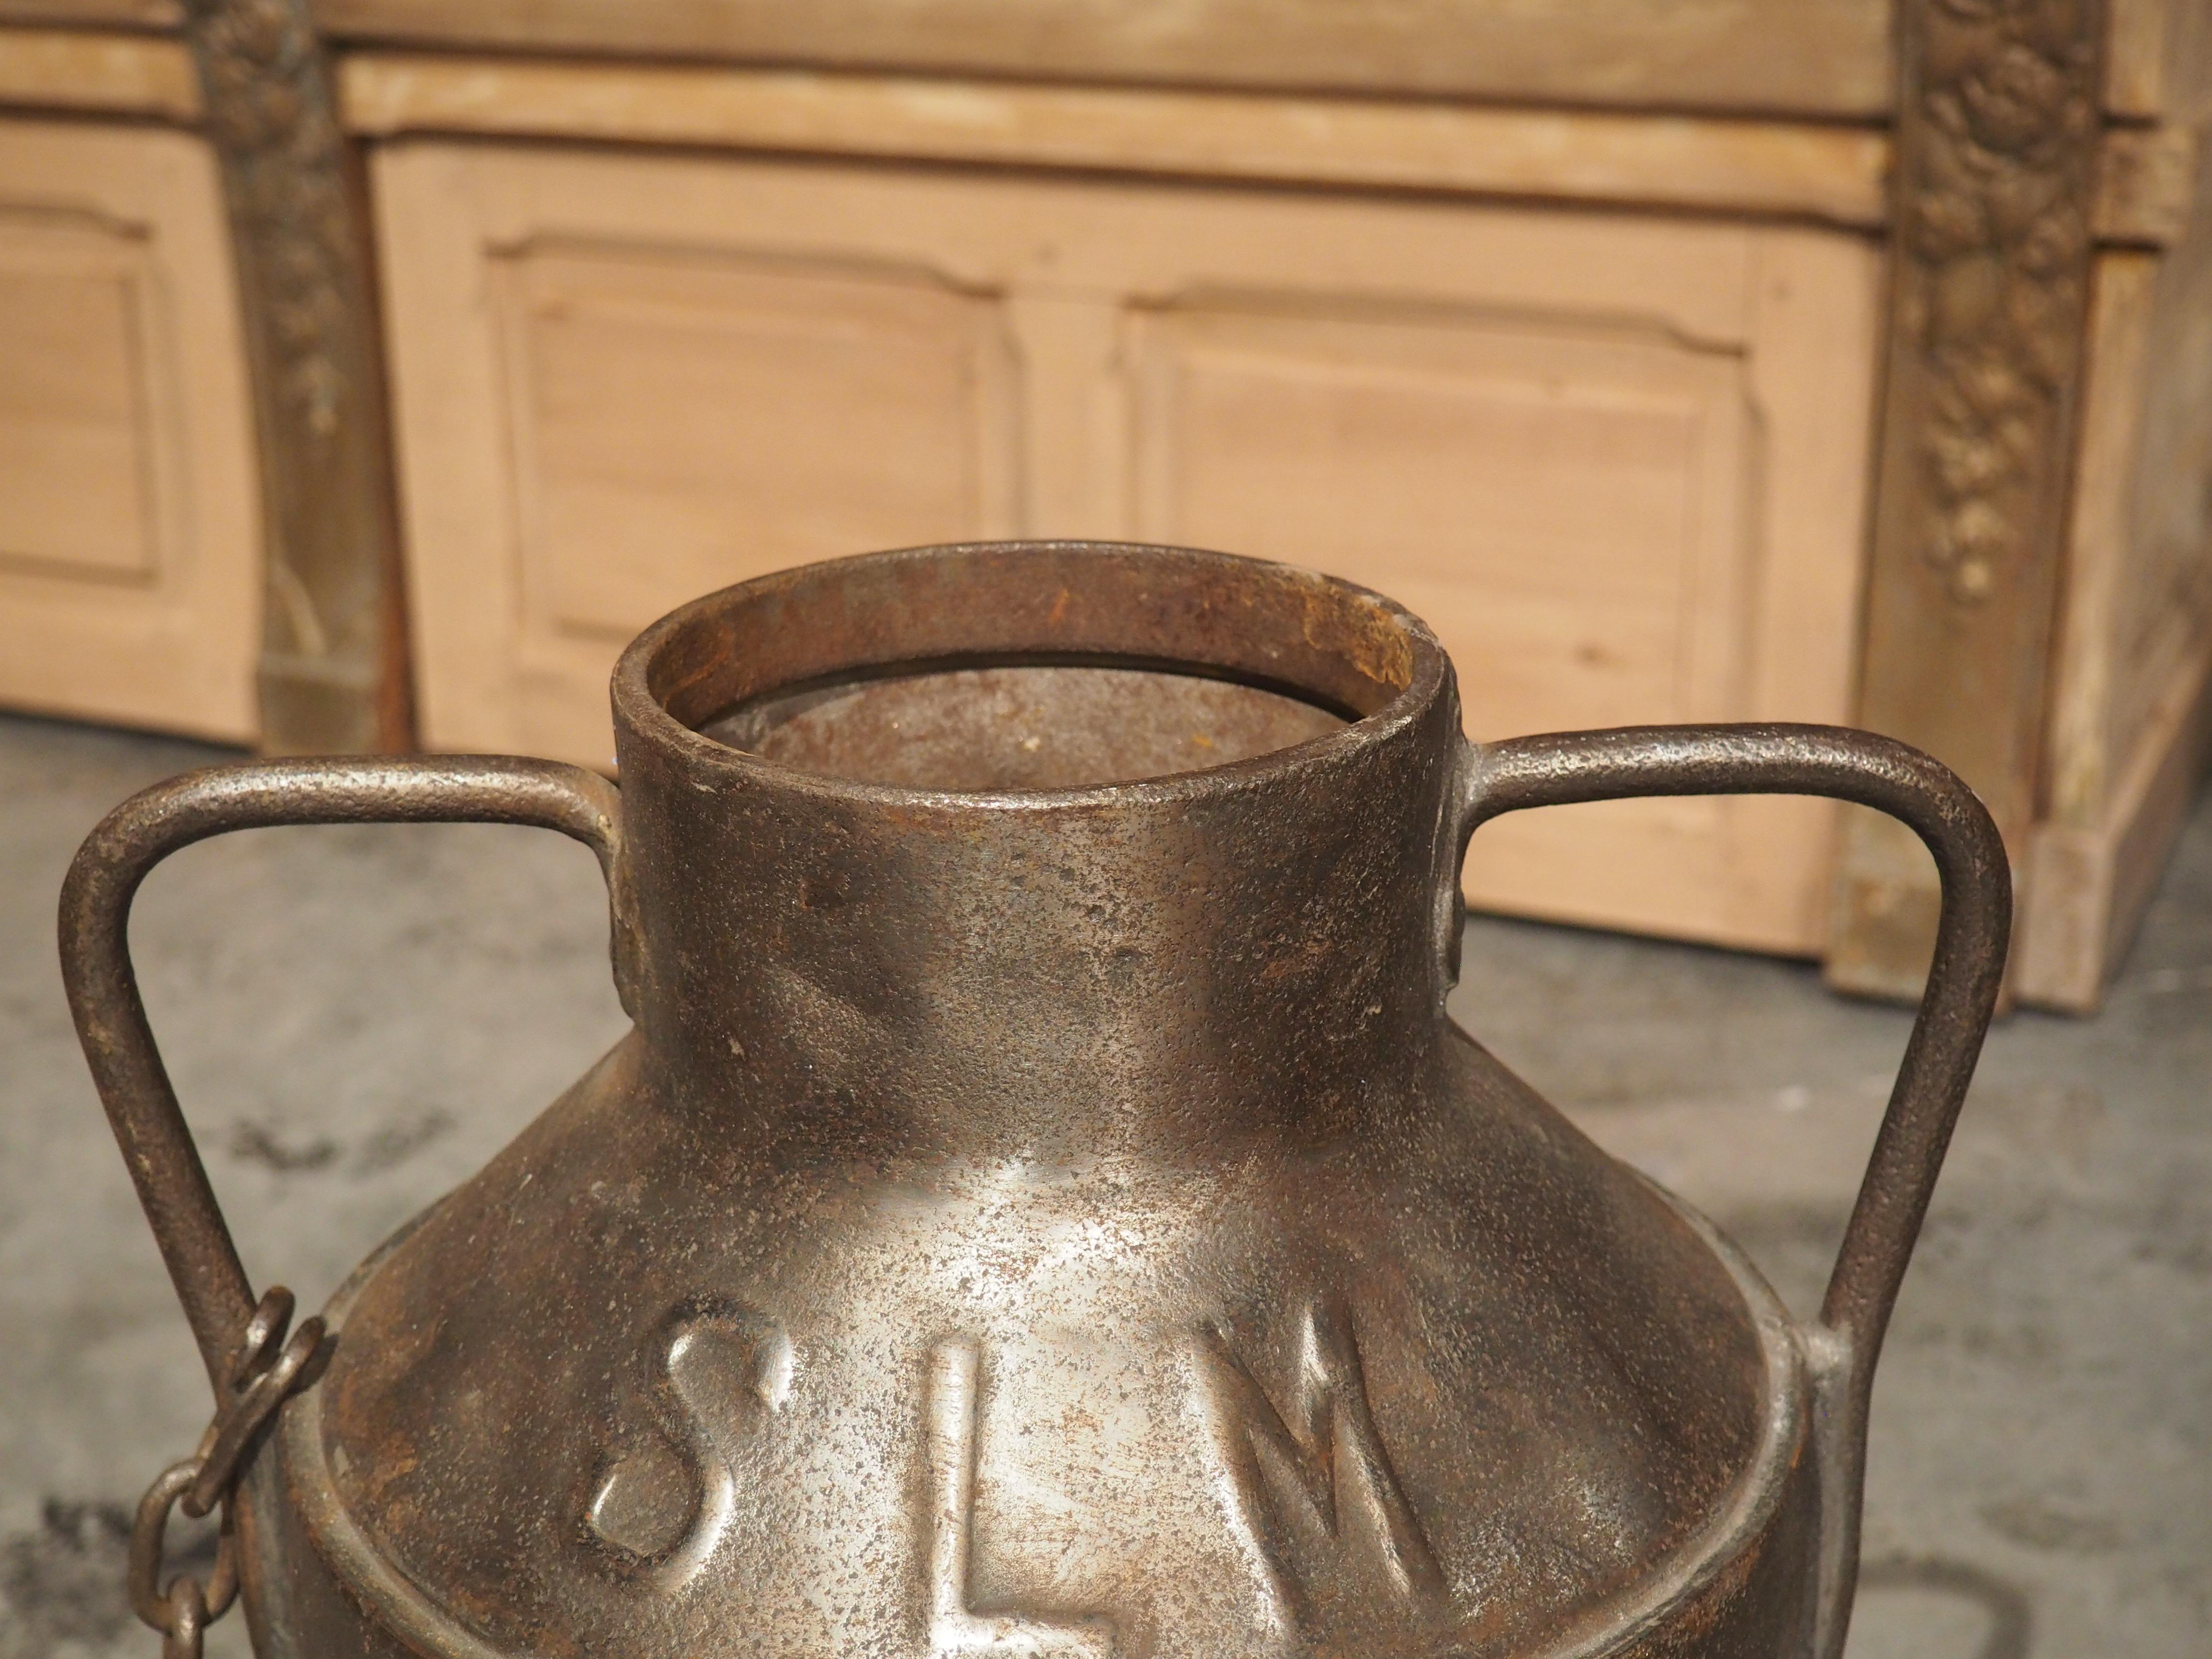 When dairy farmers traveled to the market, they would use large metal jugs, such as this cast iron milk container, to sell milk to local customers. The cast iron has been stamped on the side wall with “SLM”, which is the production mark of a Swiss